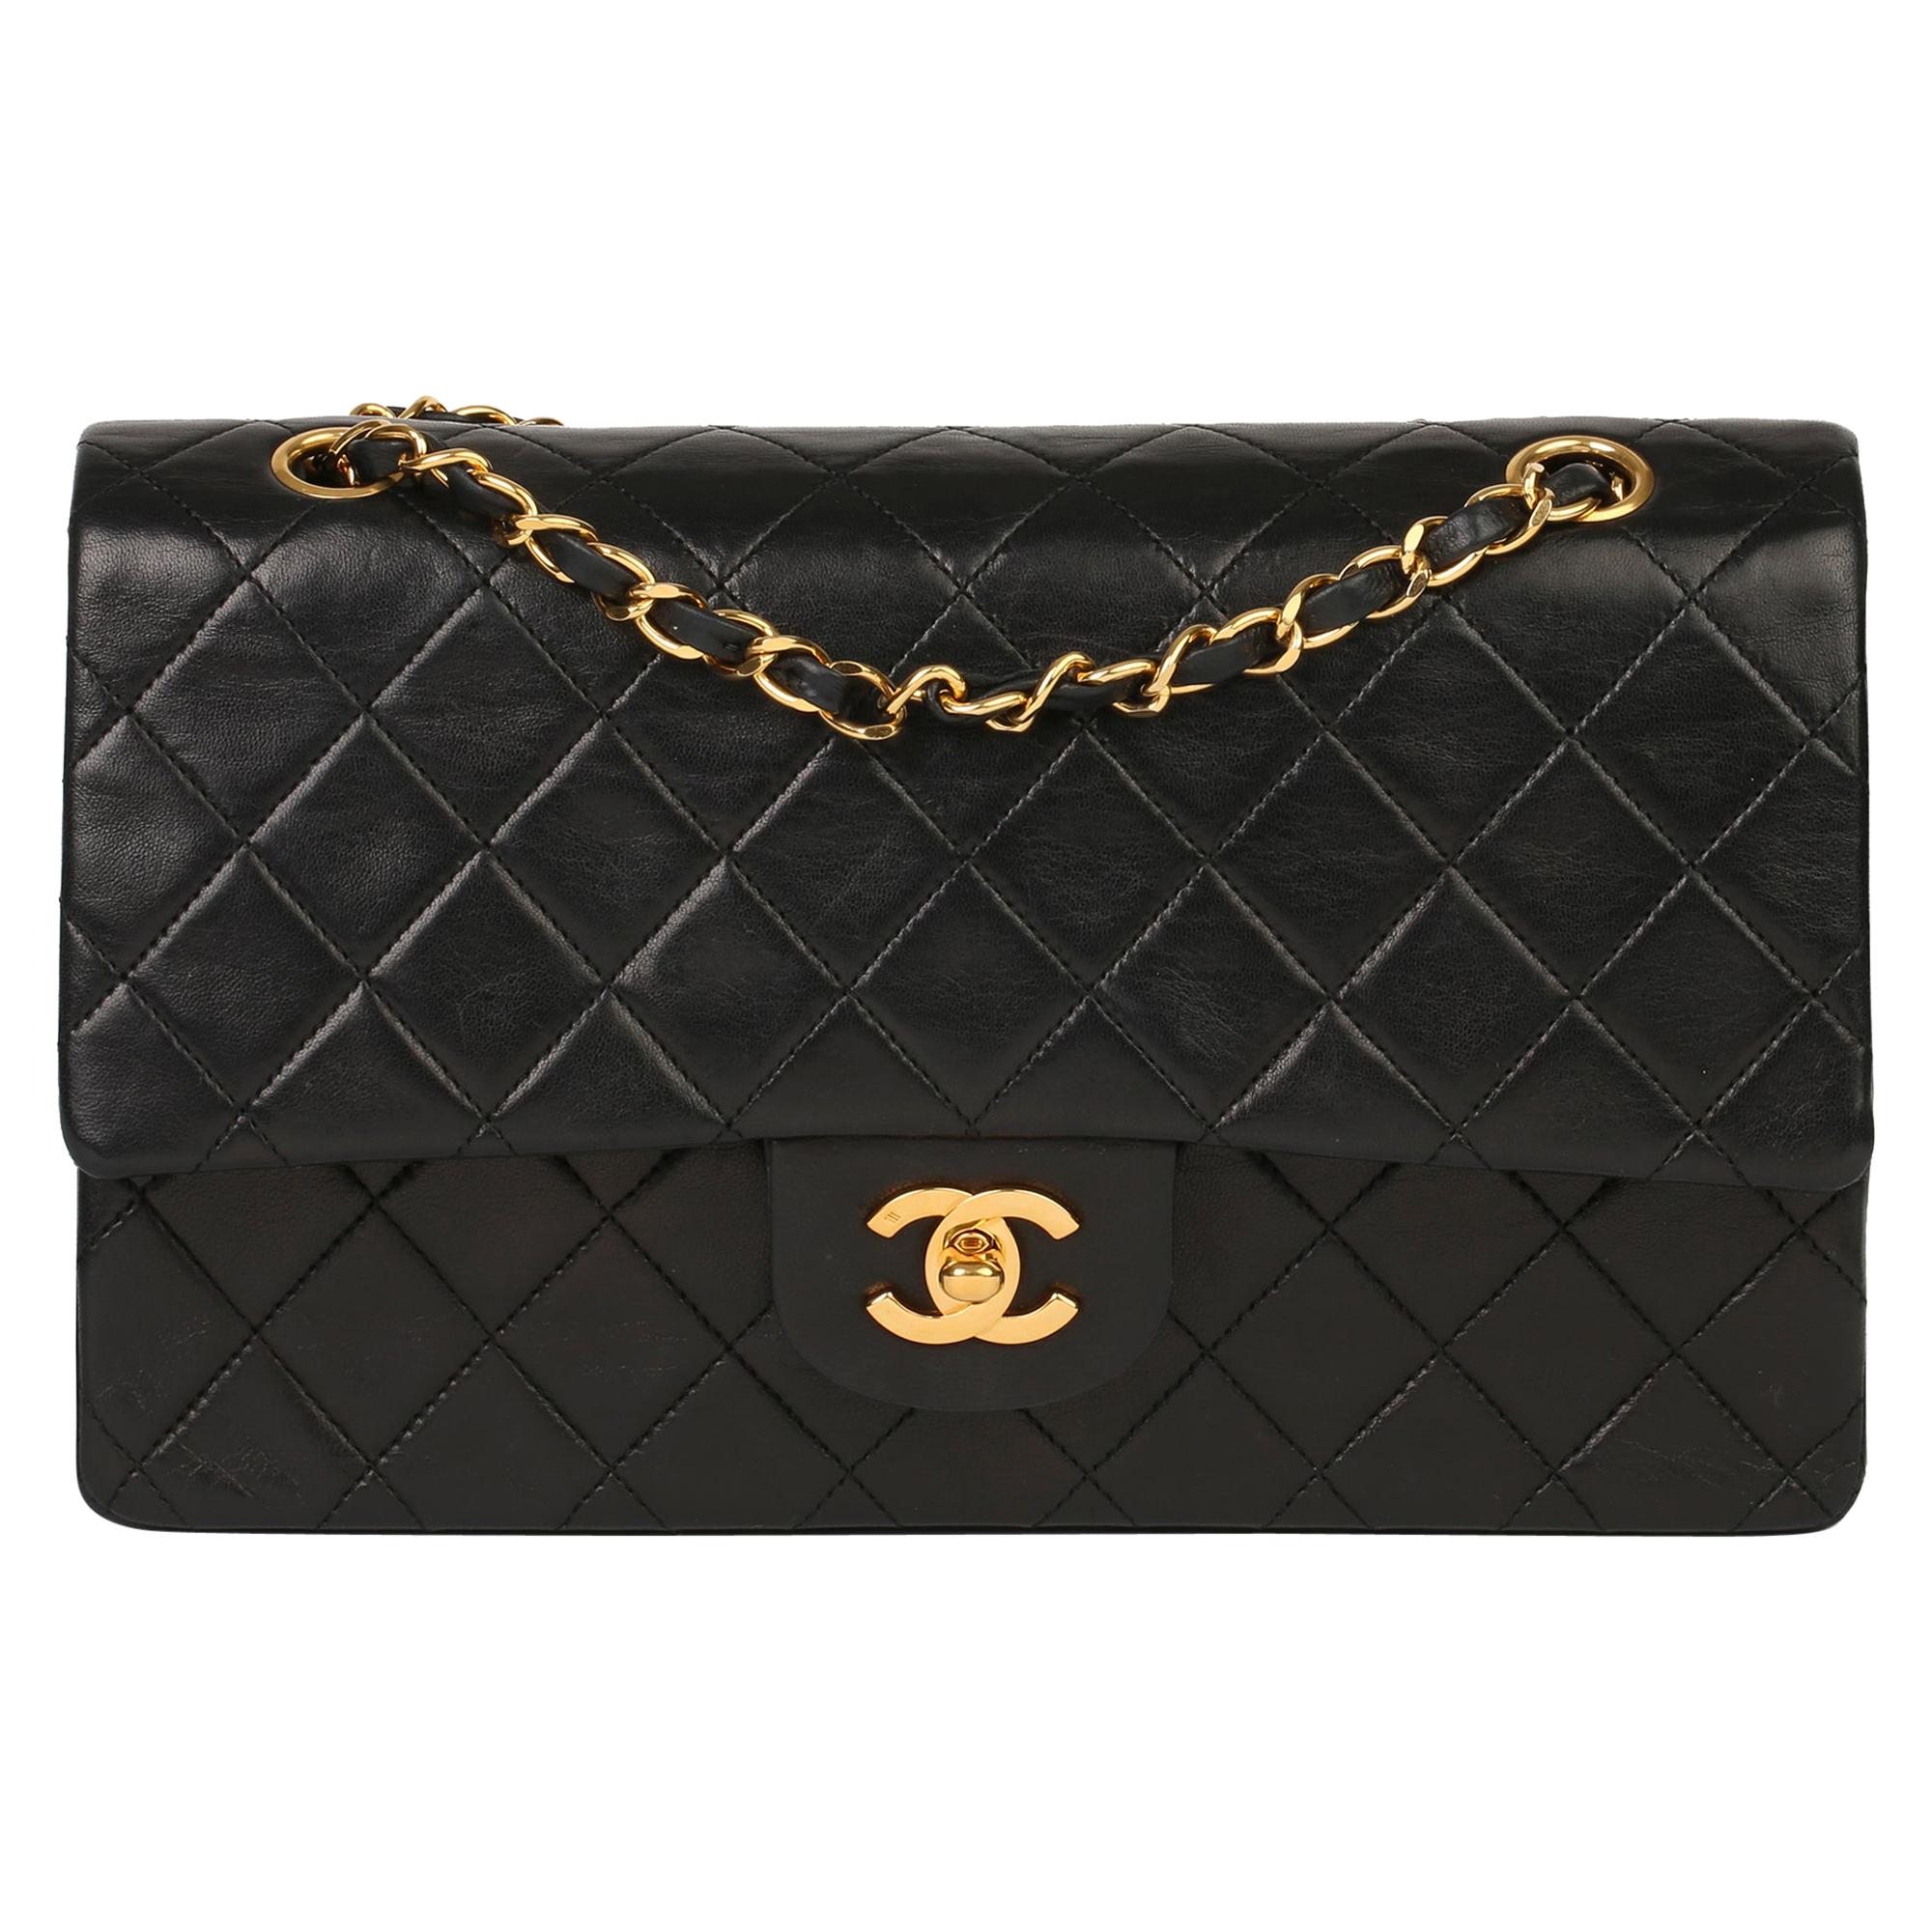 1991 Chanel Black Quilted Lambskin Vintage Medium Classic Double Flap Bag 